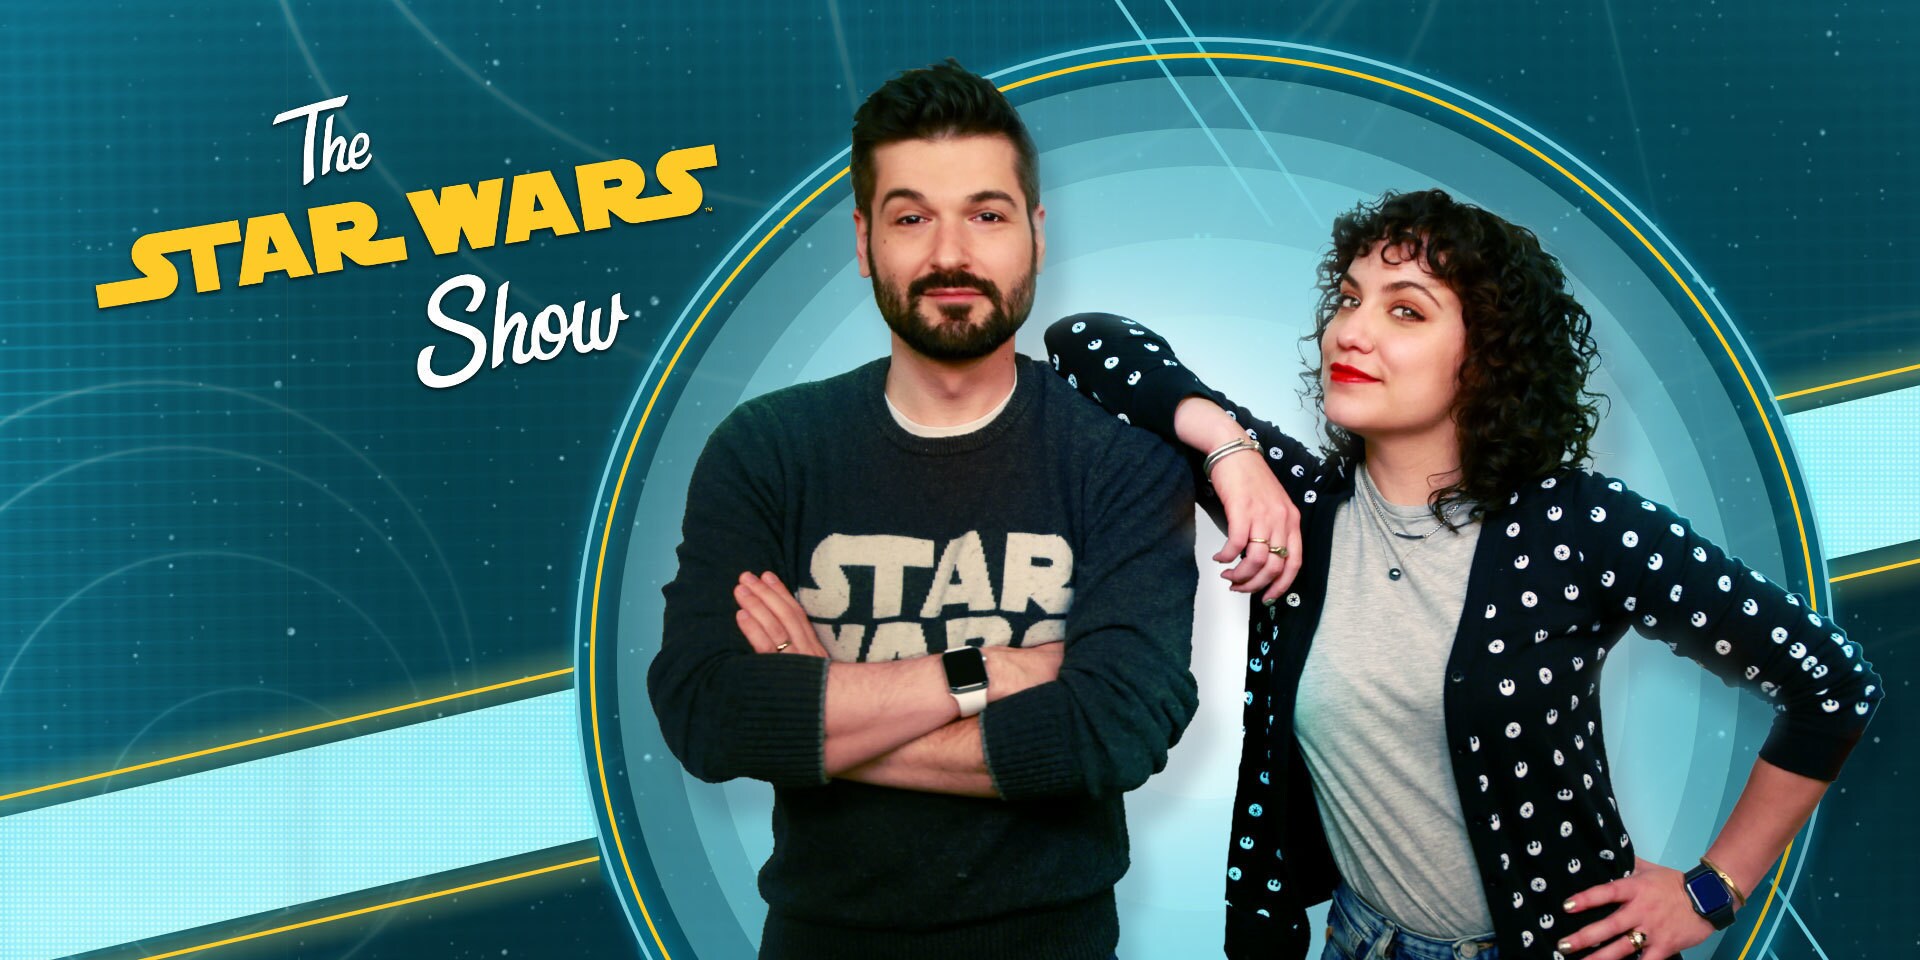 The Star Wars Show